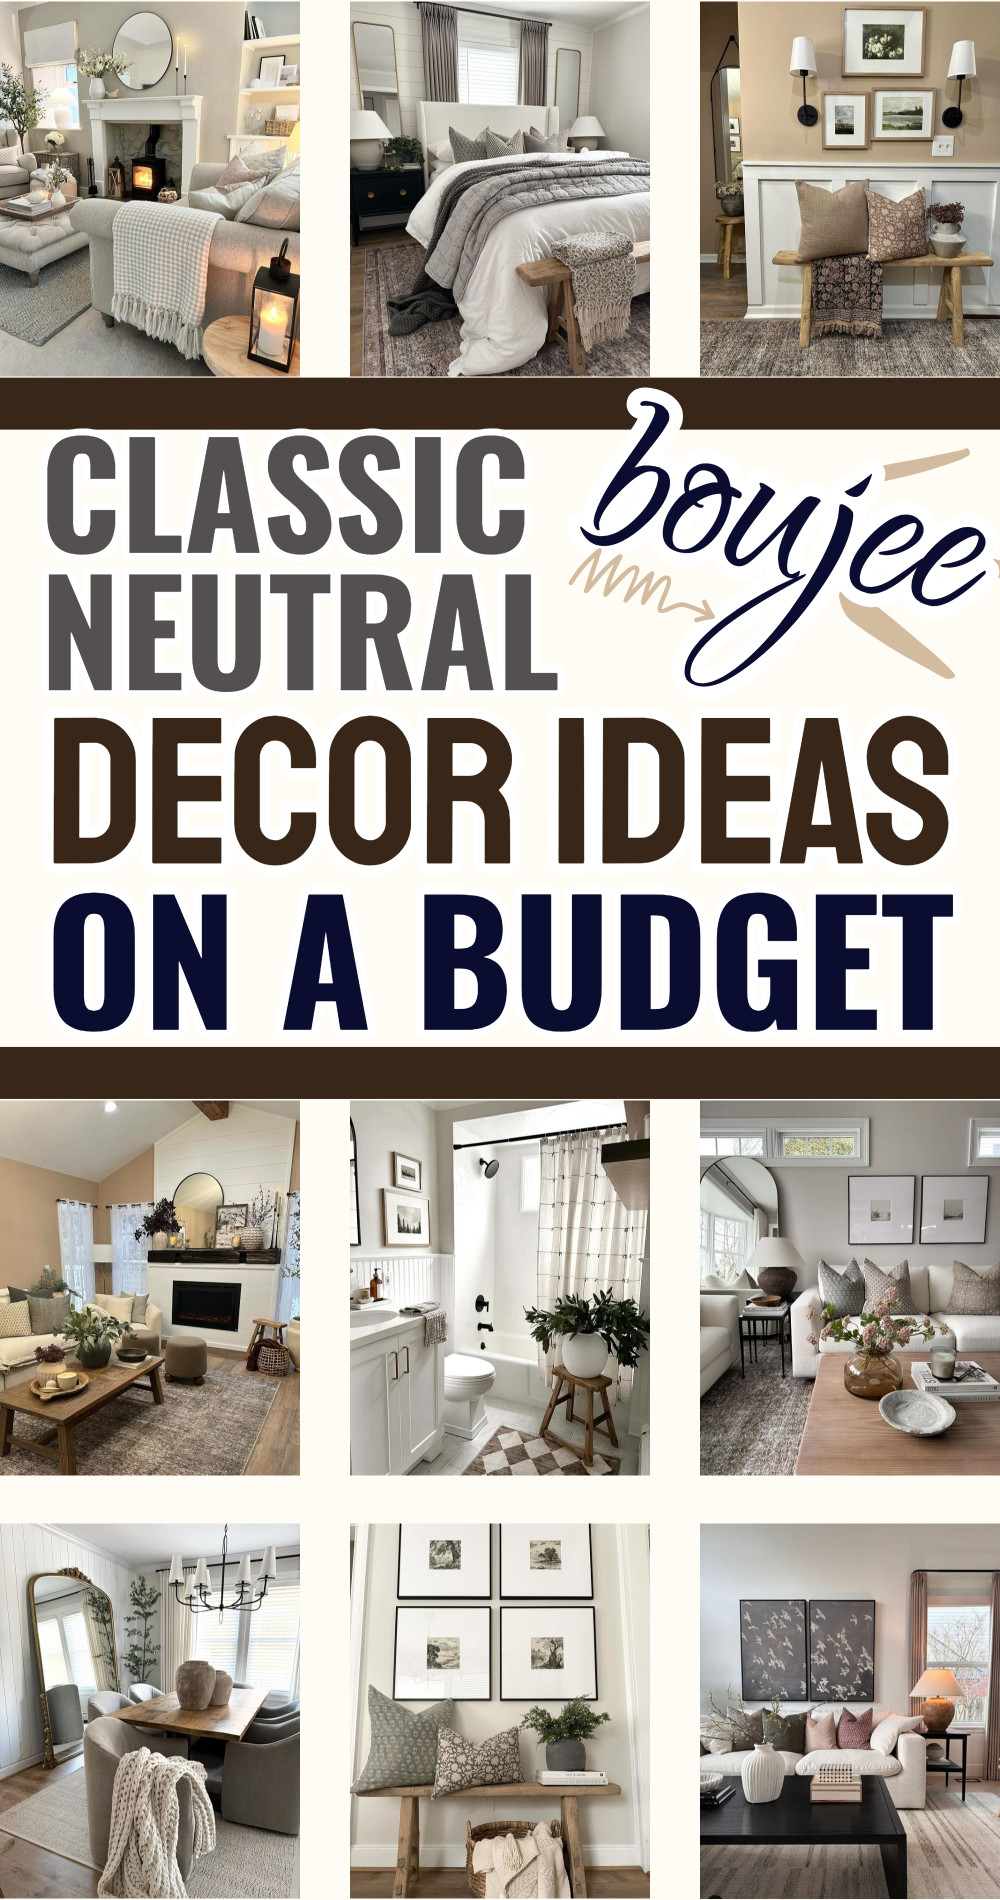 classic neutral boujee home decor ideas on a budget